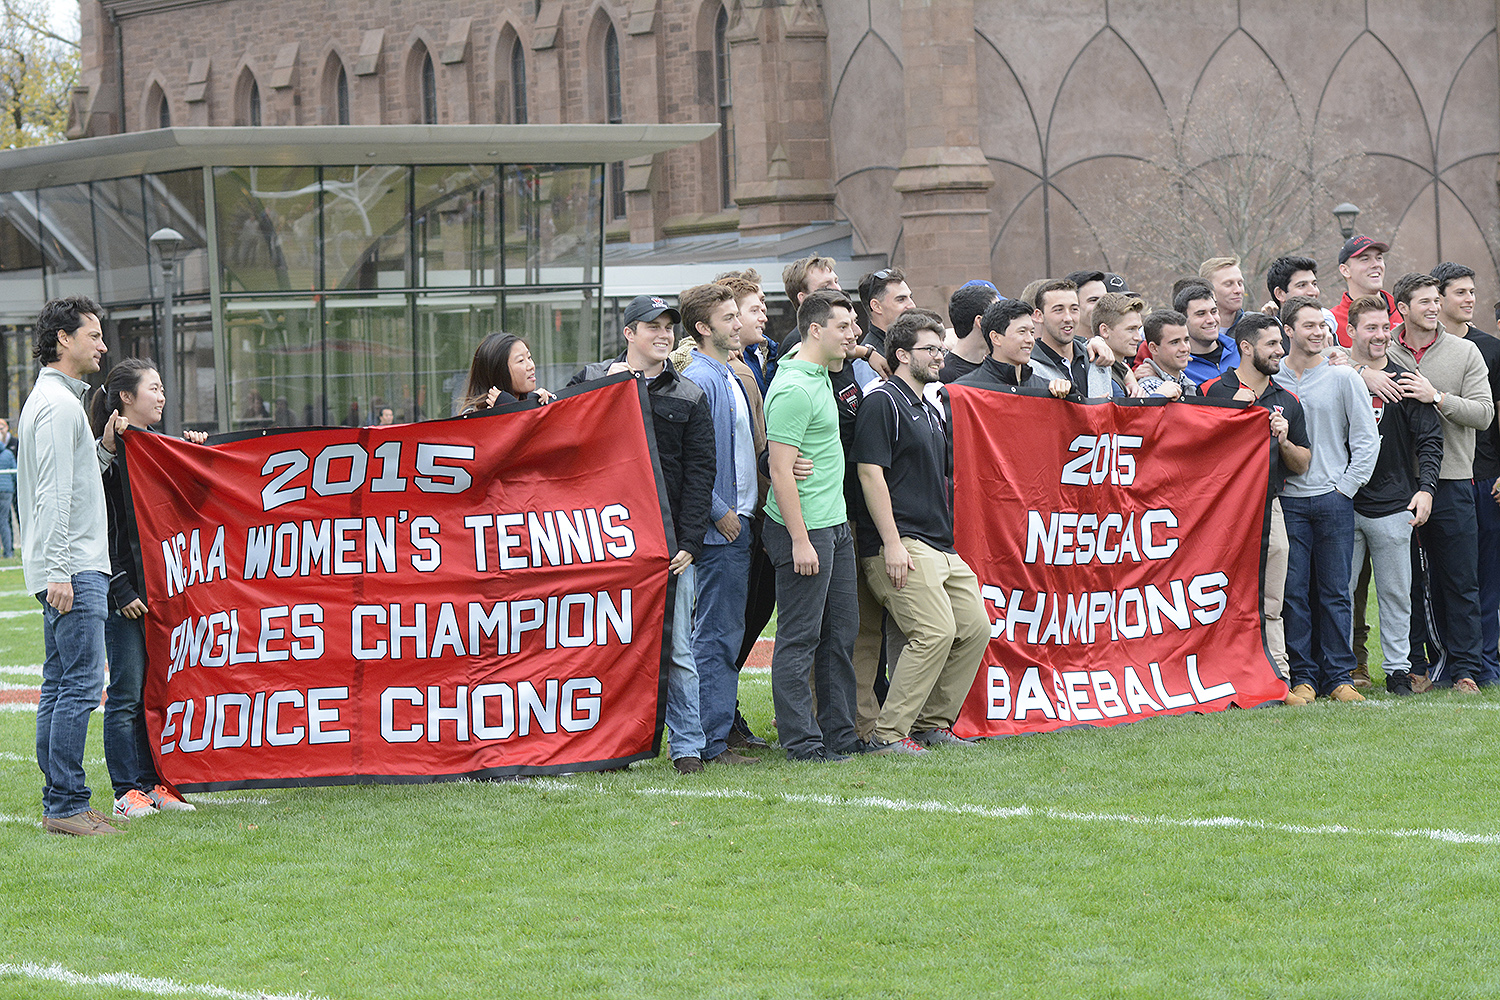 During Wesleyan’s Homecoming game Saturday, Wesleyan's Director of Athletics Mike Whalen honored the achievements of outstanding student athletes. He praised the 2014-15 men’s basketball team, 2015 baseball team, and tennis stars Eudice Chong ’18 and Victoria Yu ’19. 